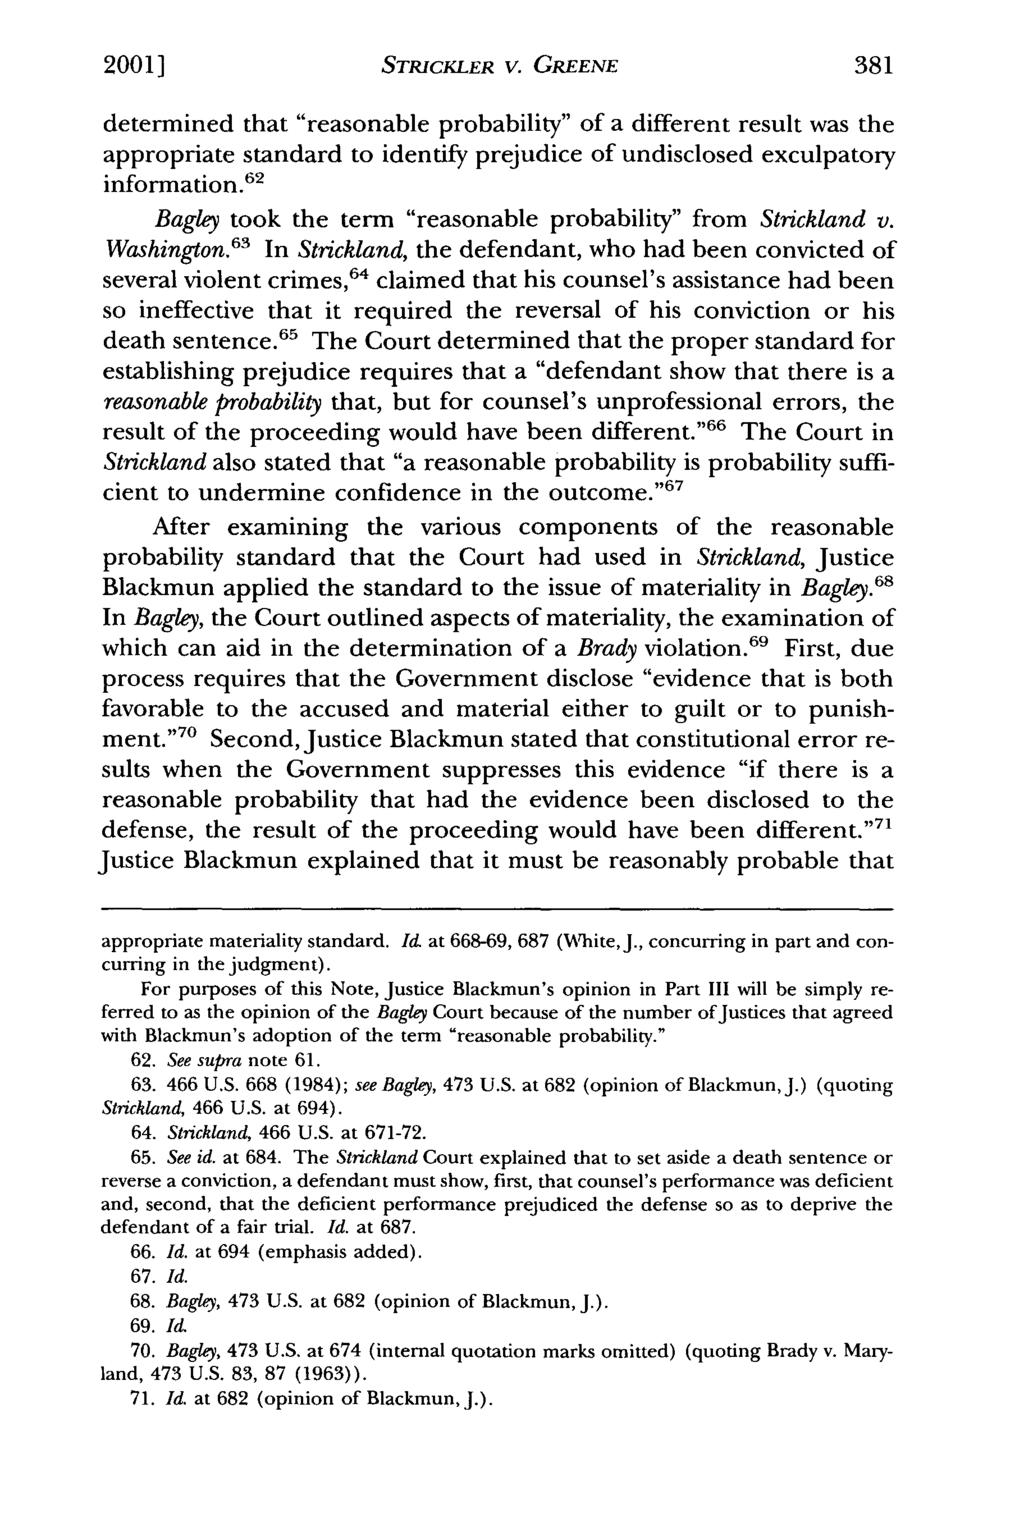 2001] STRICKLER V. GREENE determined that "reasonable probability" of a different result was the appropriate standard to identify prejudice of undisclosed exculpatory information.